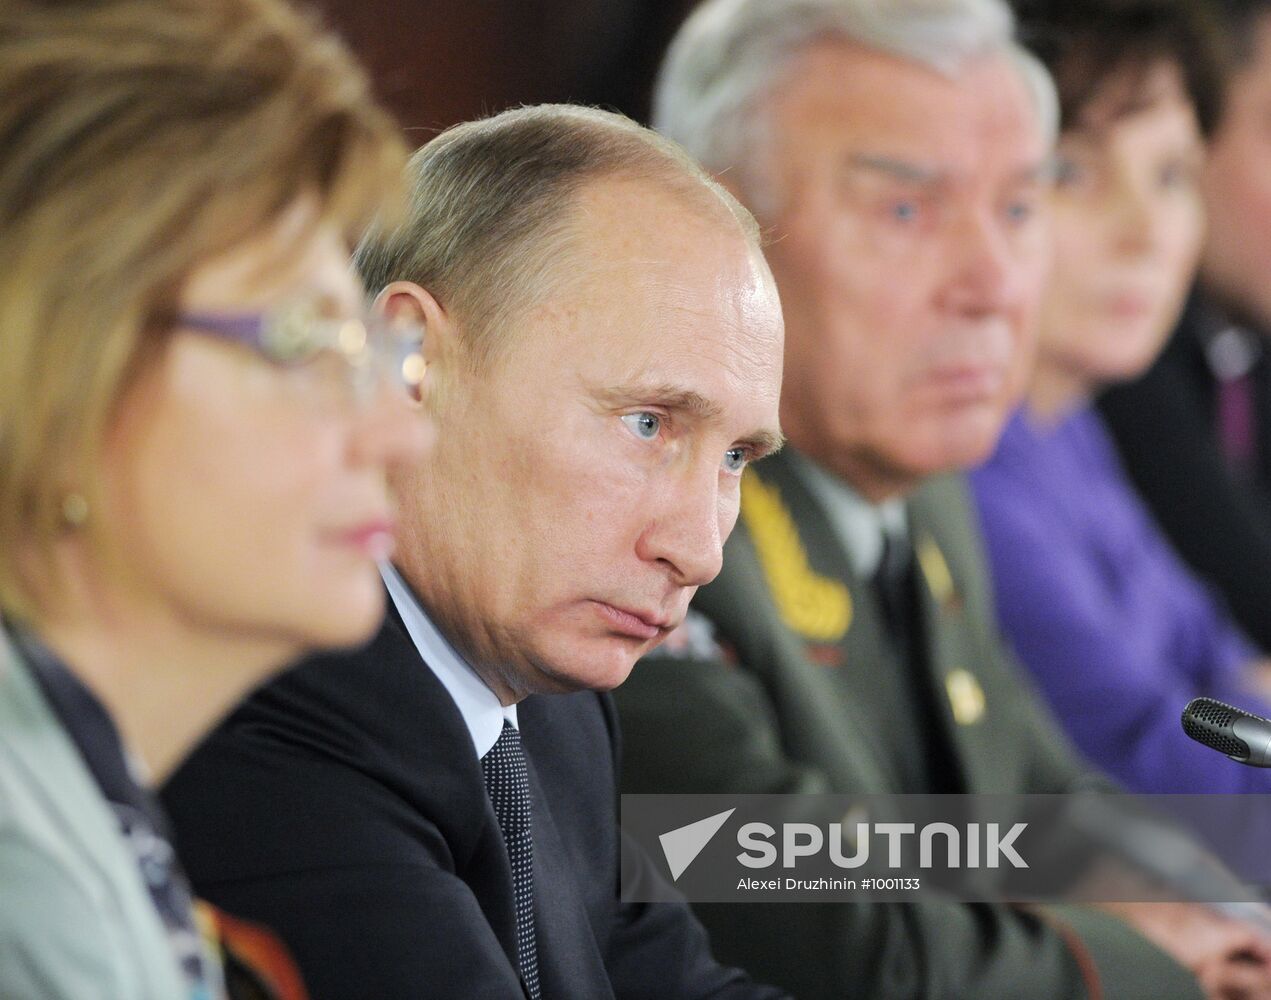 Vladimir Putin chairs All-Russia People's Front council meeting